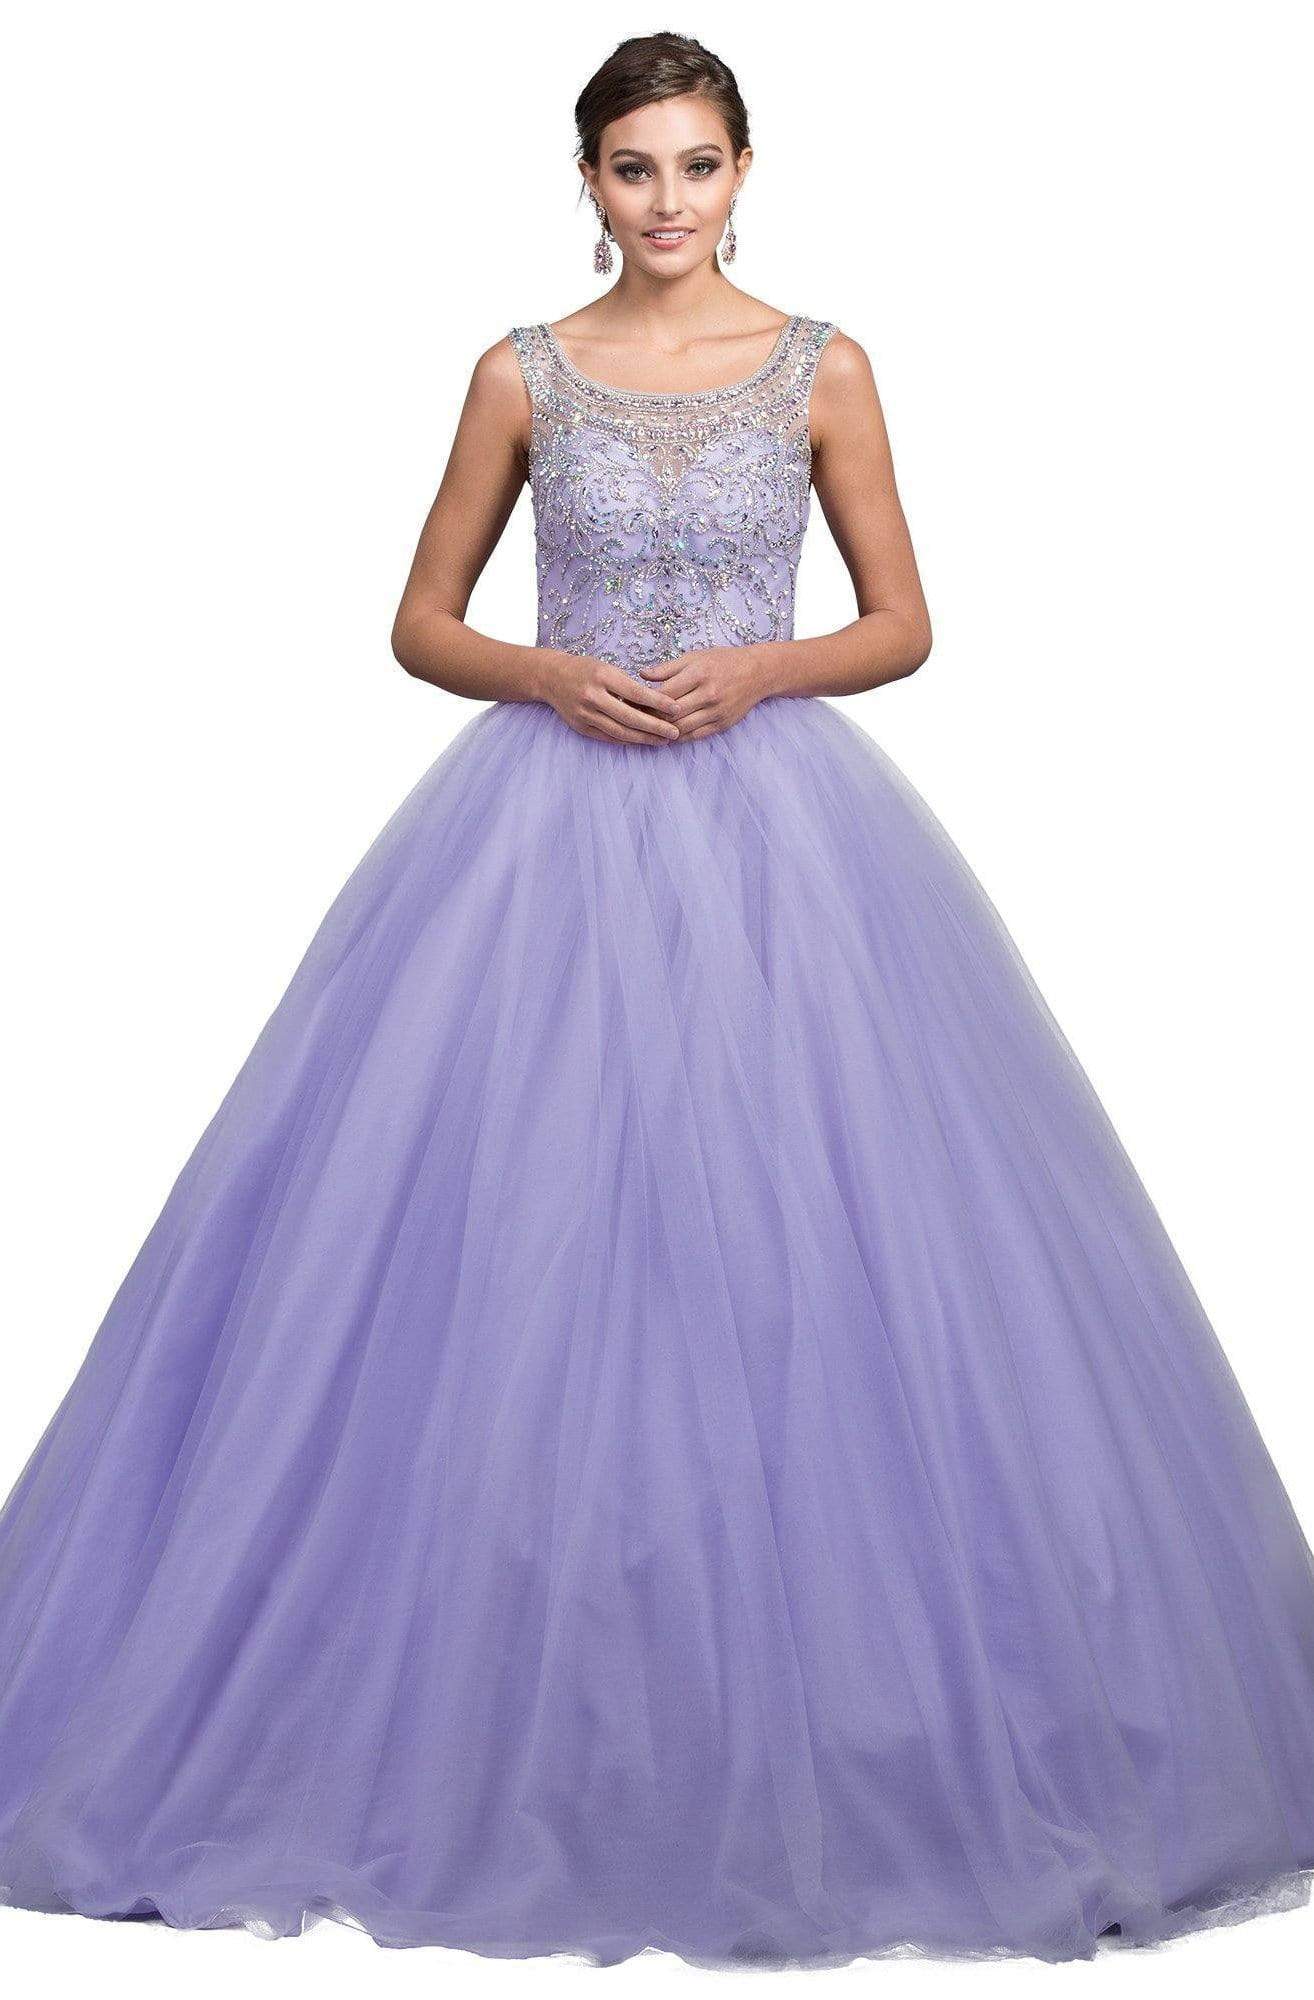 Dancing Queen - 1194A Jeweled Illusion Scoop Bodice Ballgown
